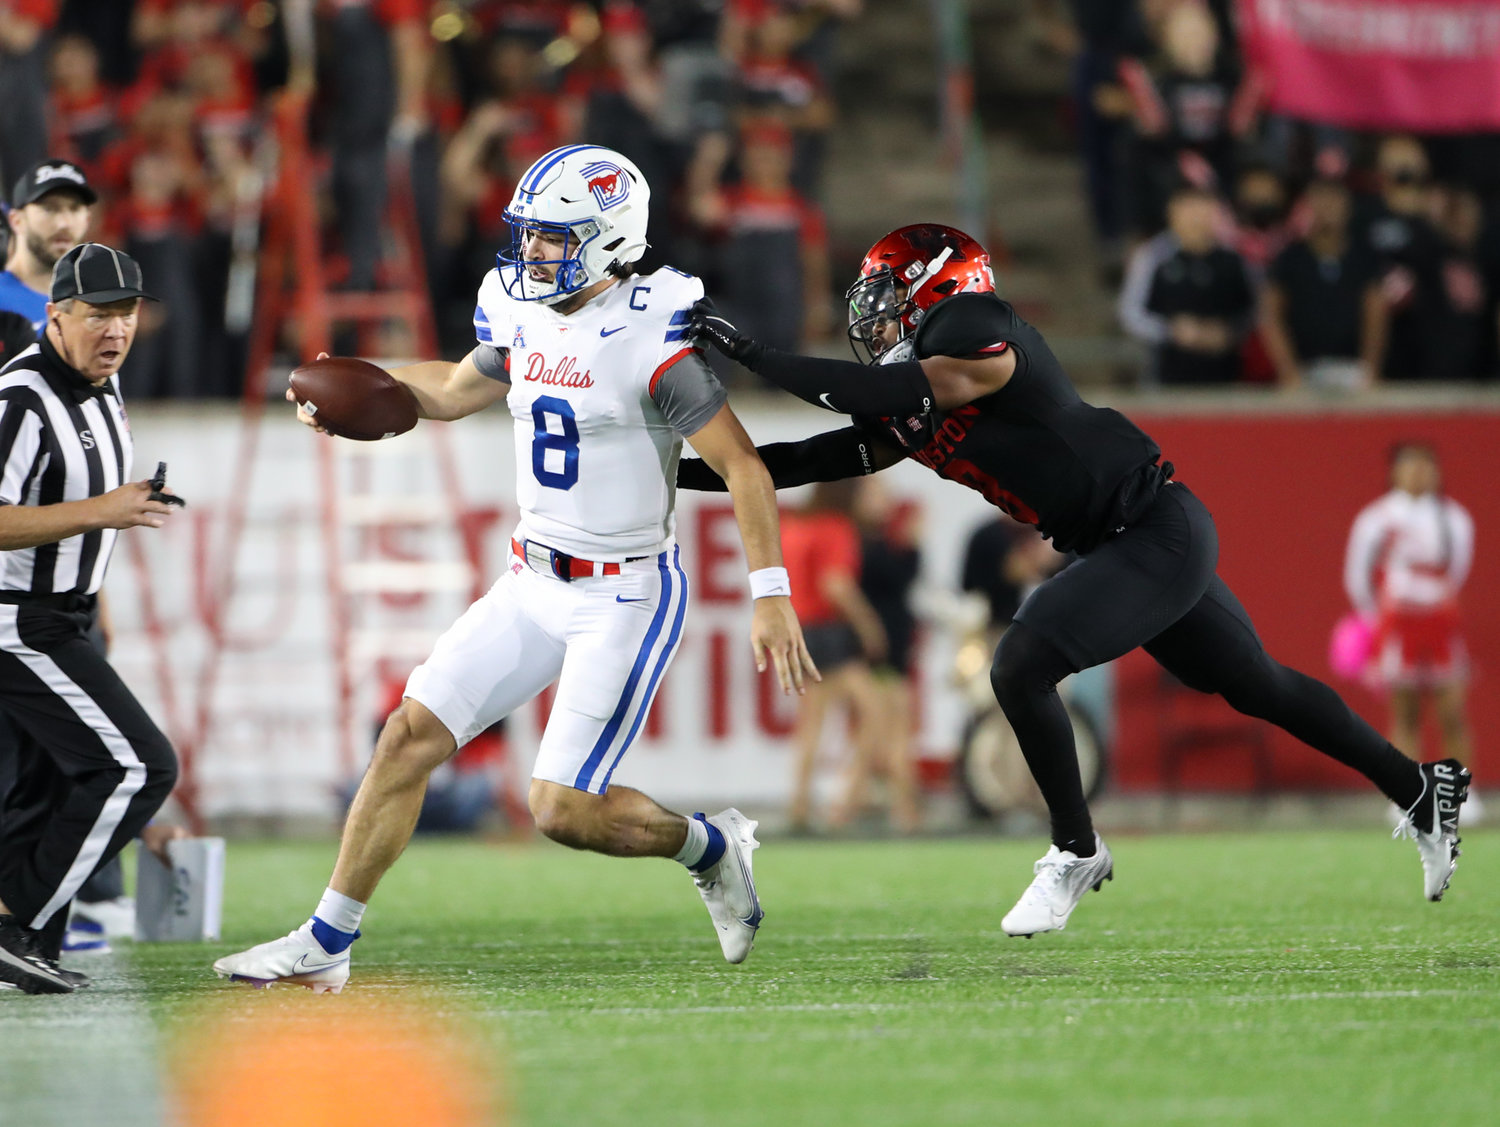 Houston Cougars cornerback Marcus Jones (8) runs SMU Mustangs quarterback Tanner Mordecai (8) out of bounds on a carry during an NCAA football game between Houston and SMU on October 30, 2021 in Houston, Texas.